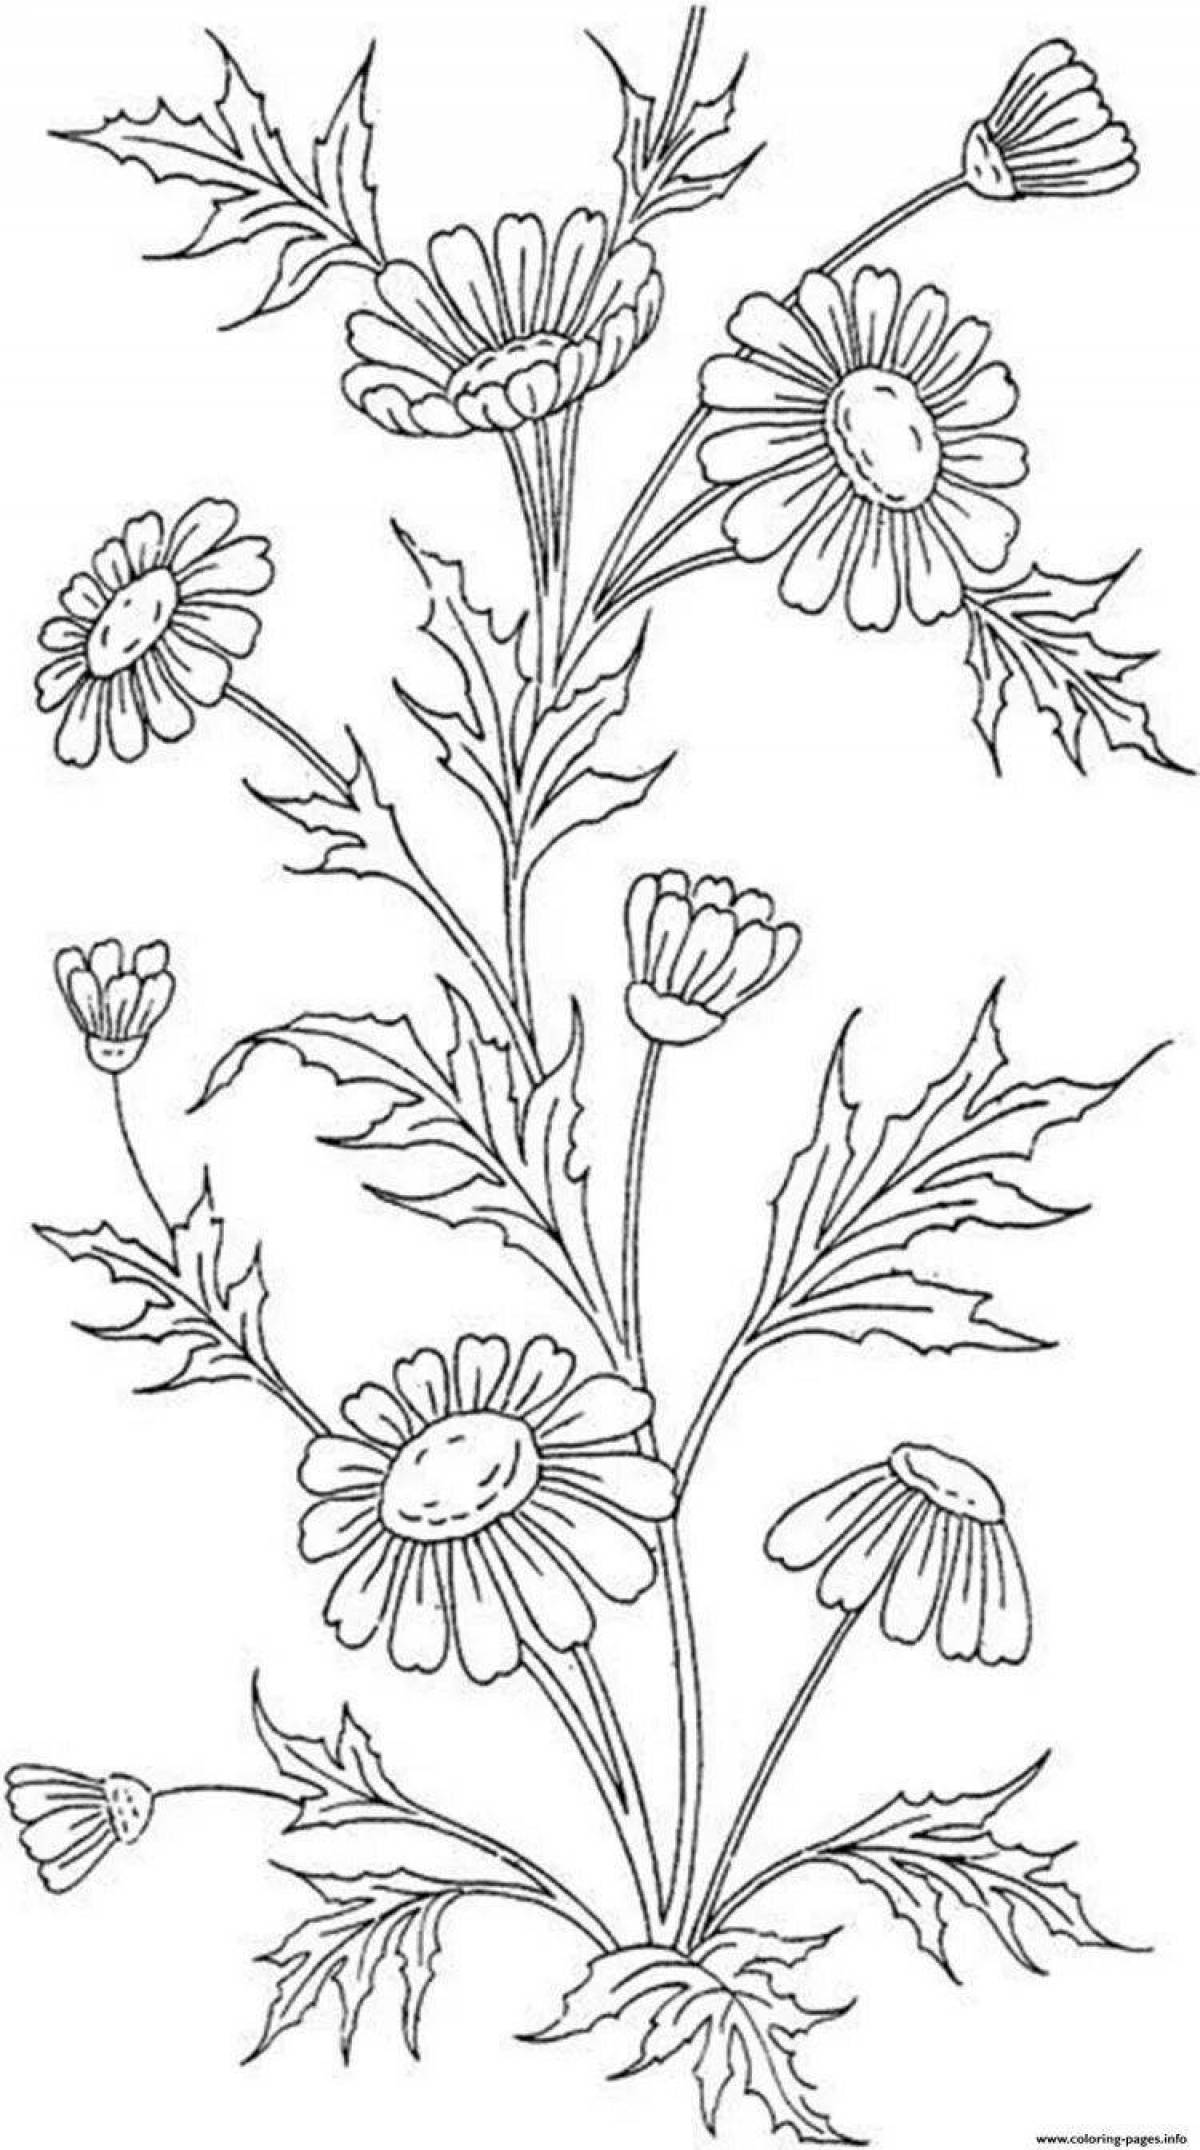 Coloring page fancy chicory